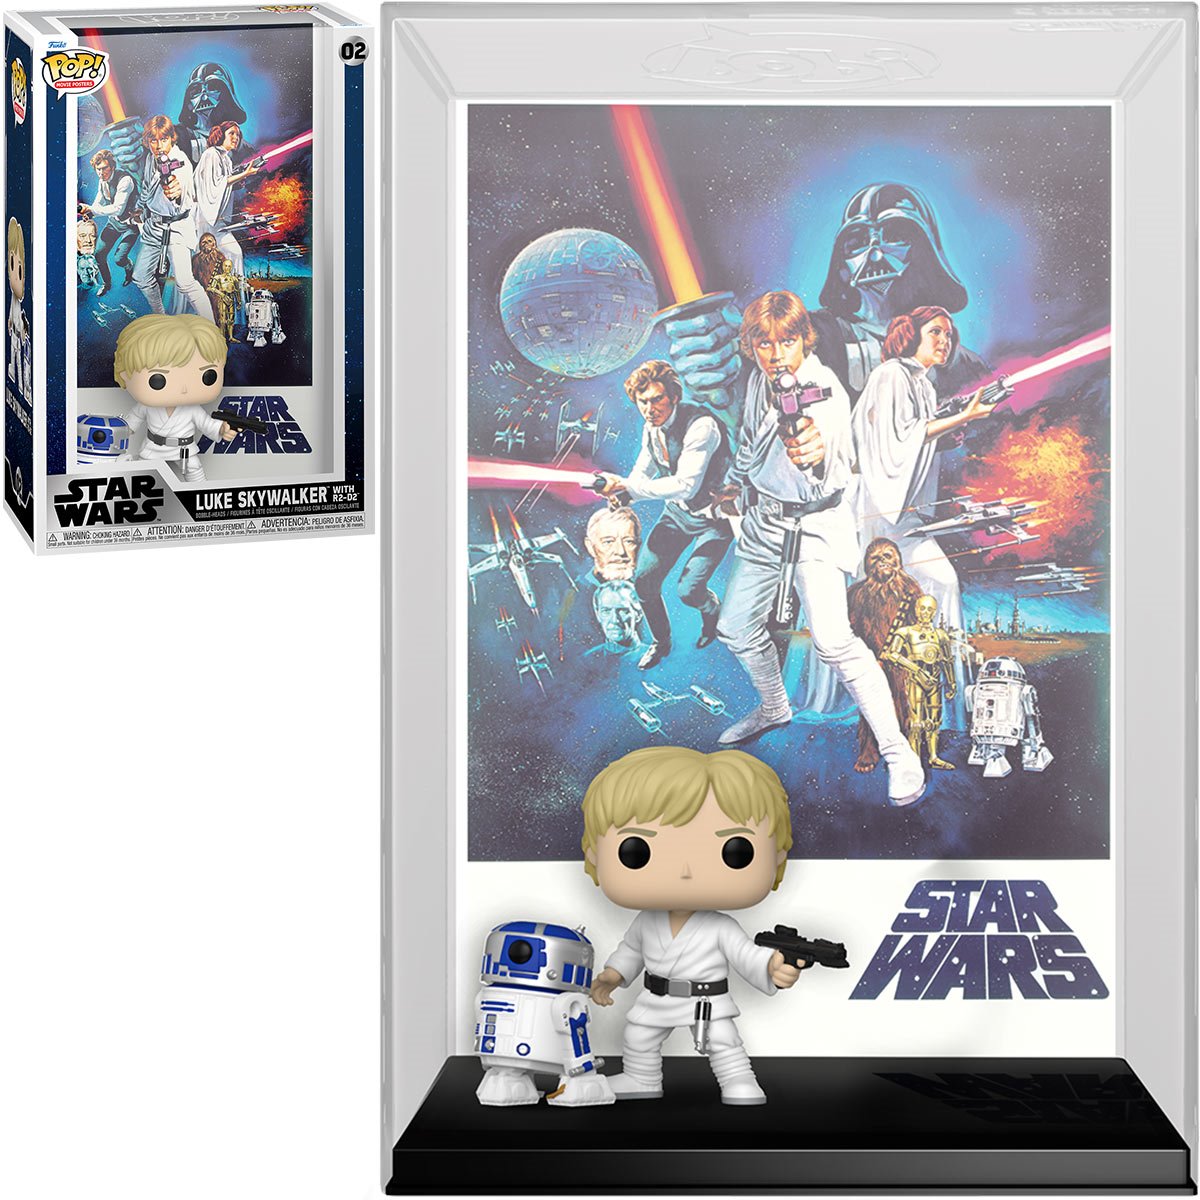 Star Wars: Episode IV - A New Hope Funko Pop! Movie Poster Figure